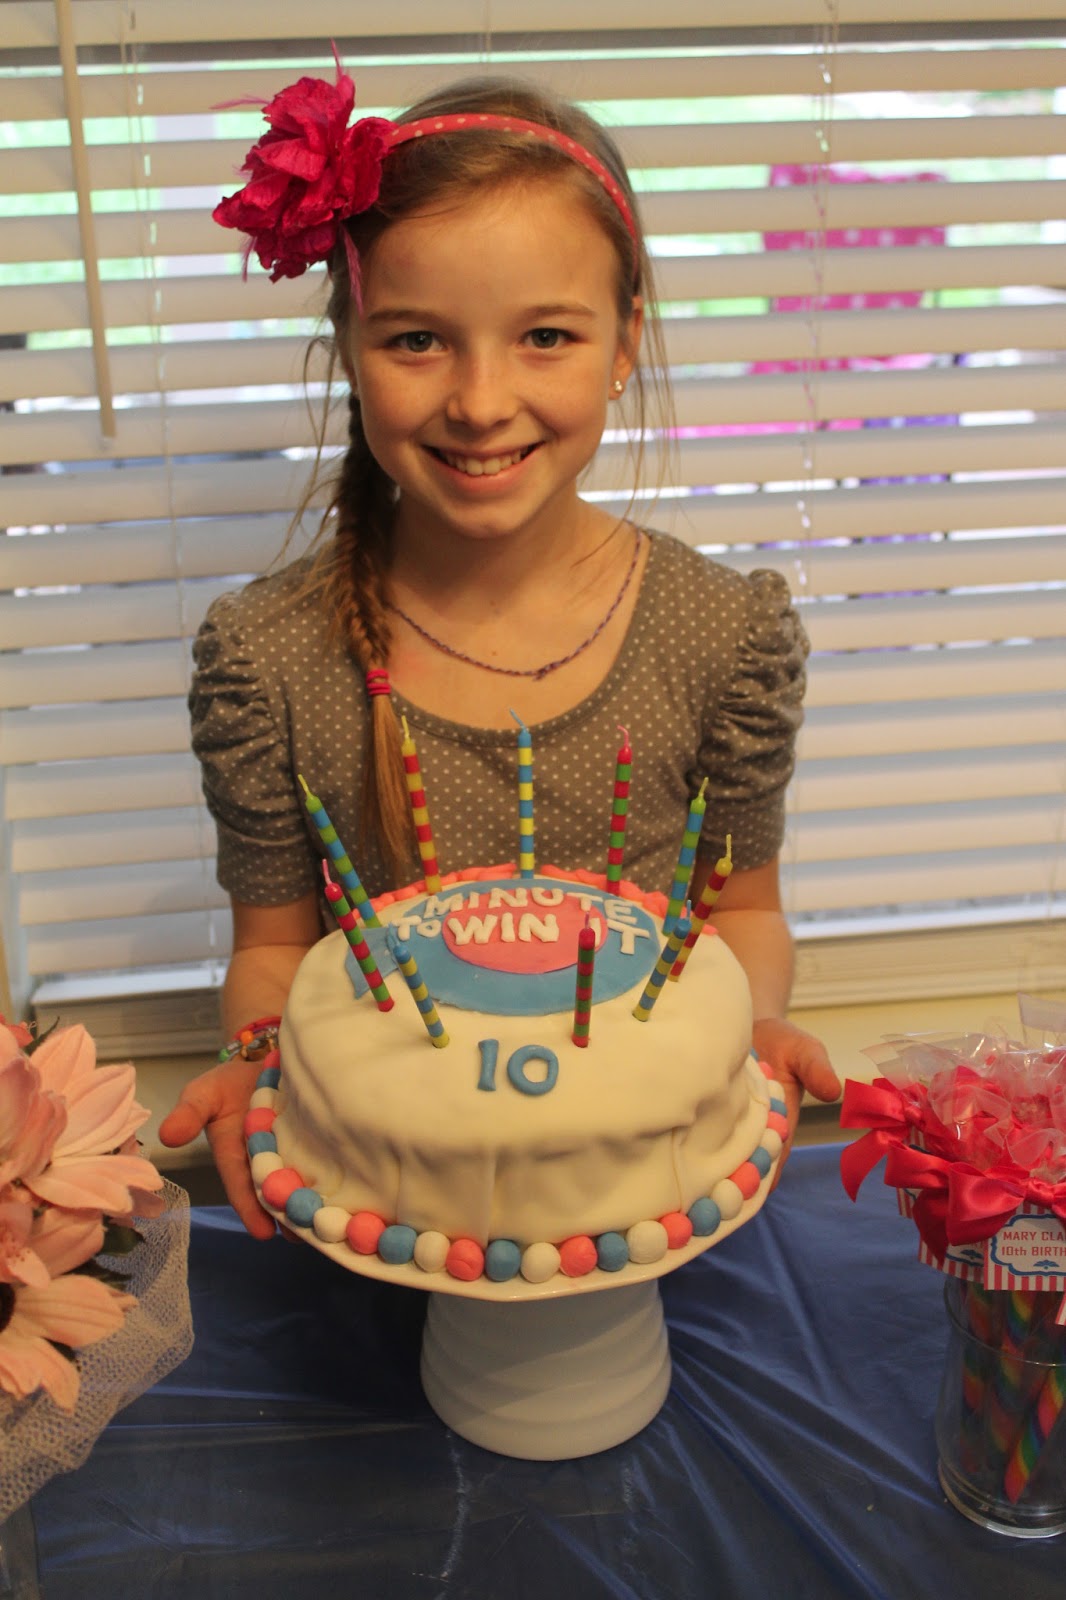 Blair's Blessings: 10 Year-Old Minute to Win It Birthday Party